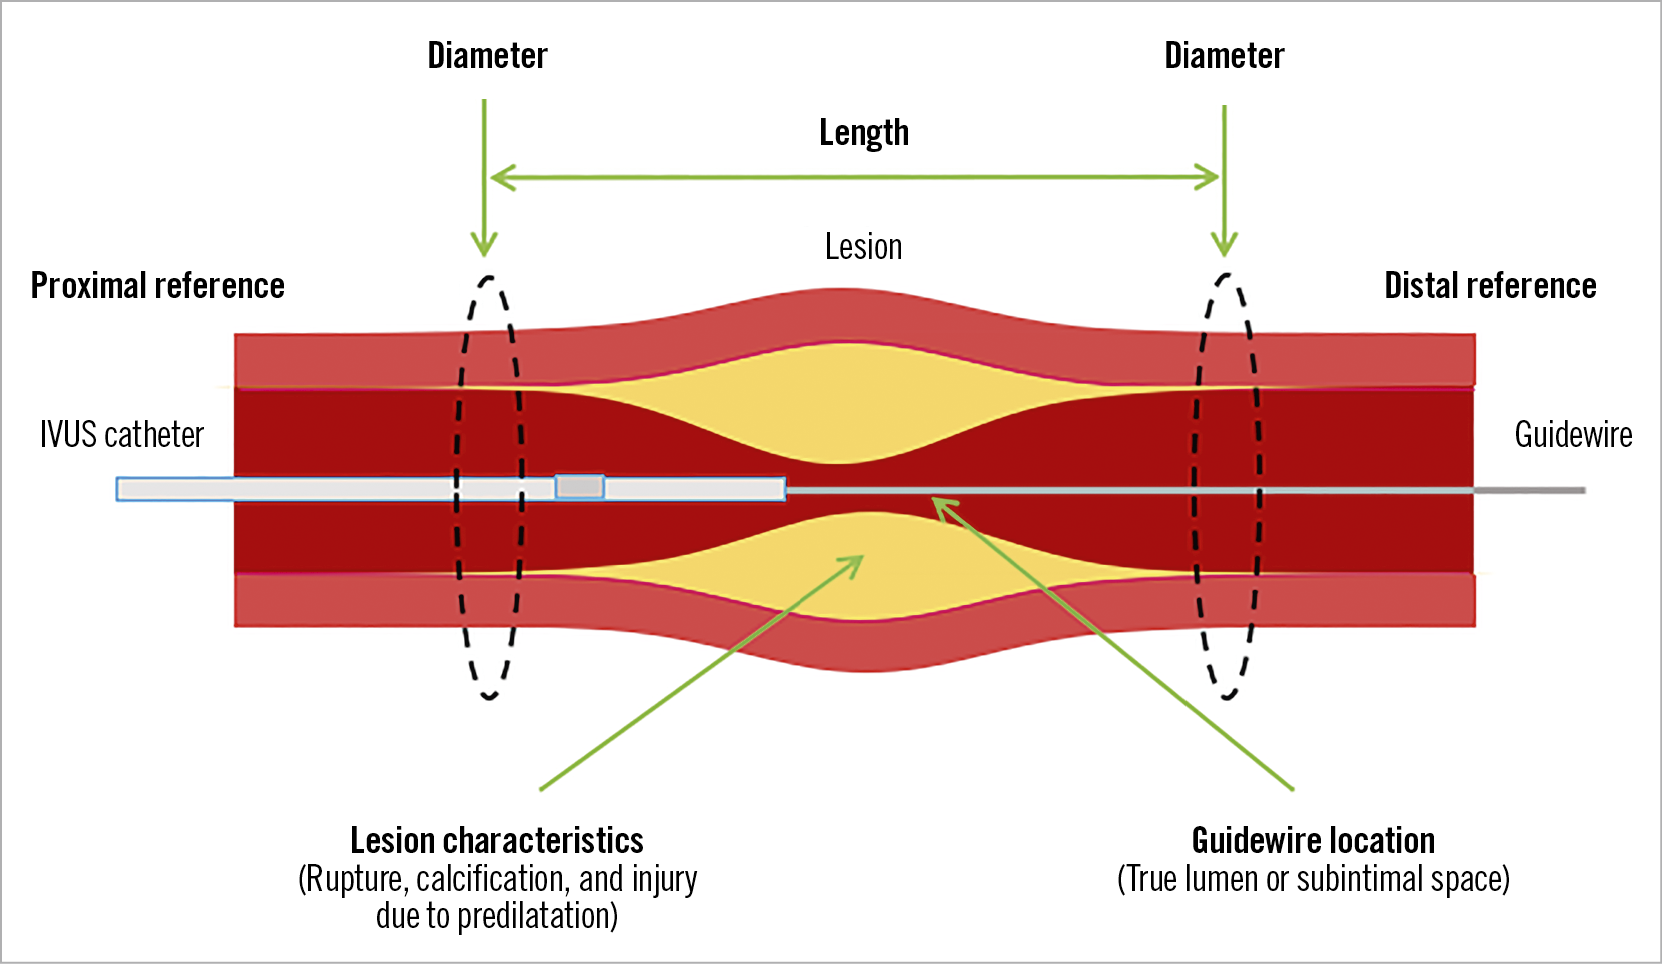 Figure 1. Role of pre-stenting IVUS. IVUS information on reference vessel/lumen diameter, lesion length, lesion characteristics and guidewire location can help with optimal stent implantation.